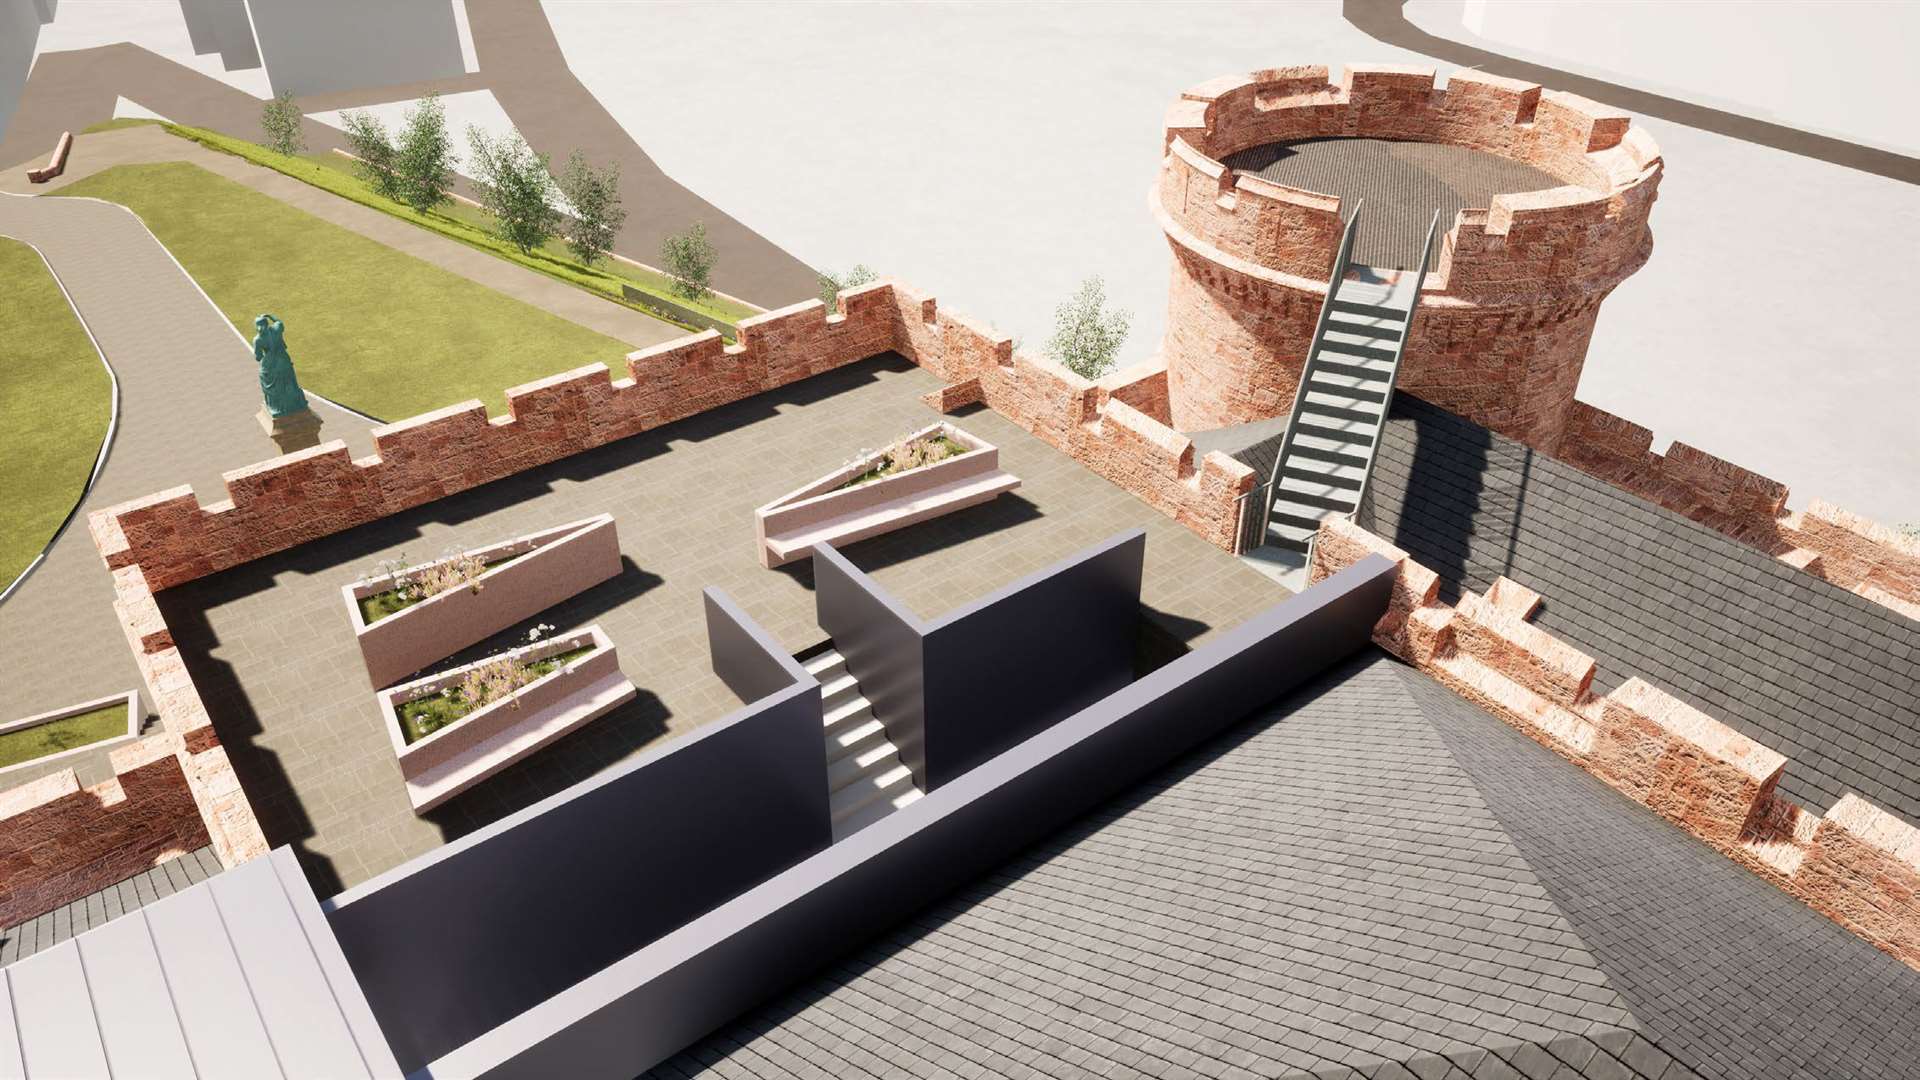 A bird's eye view of the proposed new roof terrace at Inverness Castle.